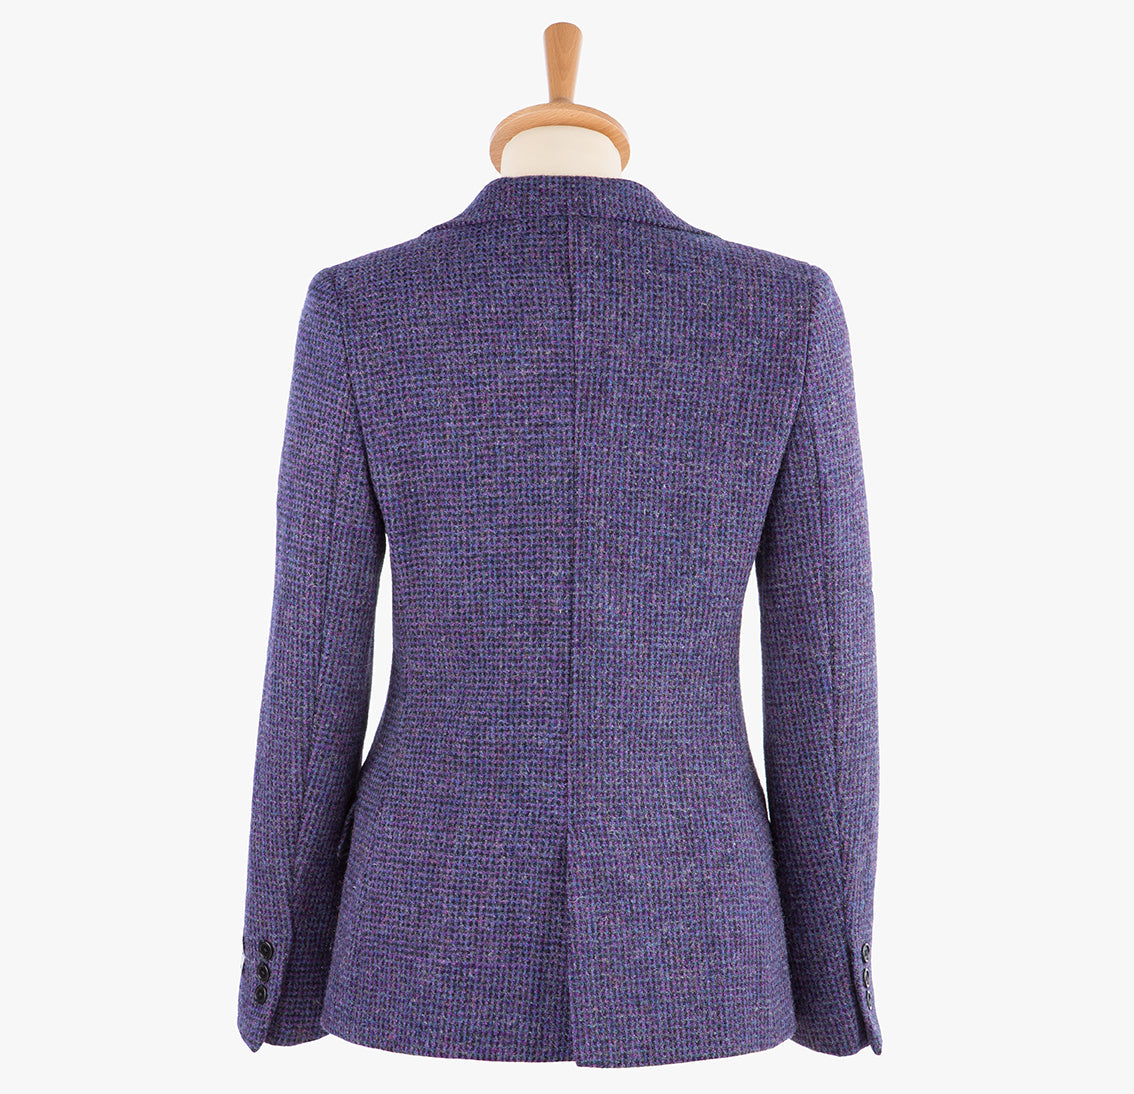 Rear view of Harris Tweed ladies jacket in violet the colour is a purple. It has three buttons on the sleeve and a back vent.